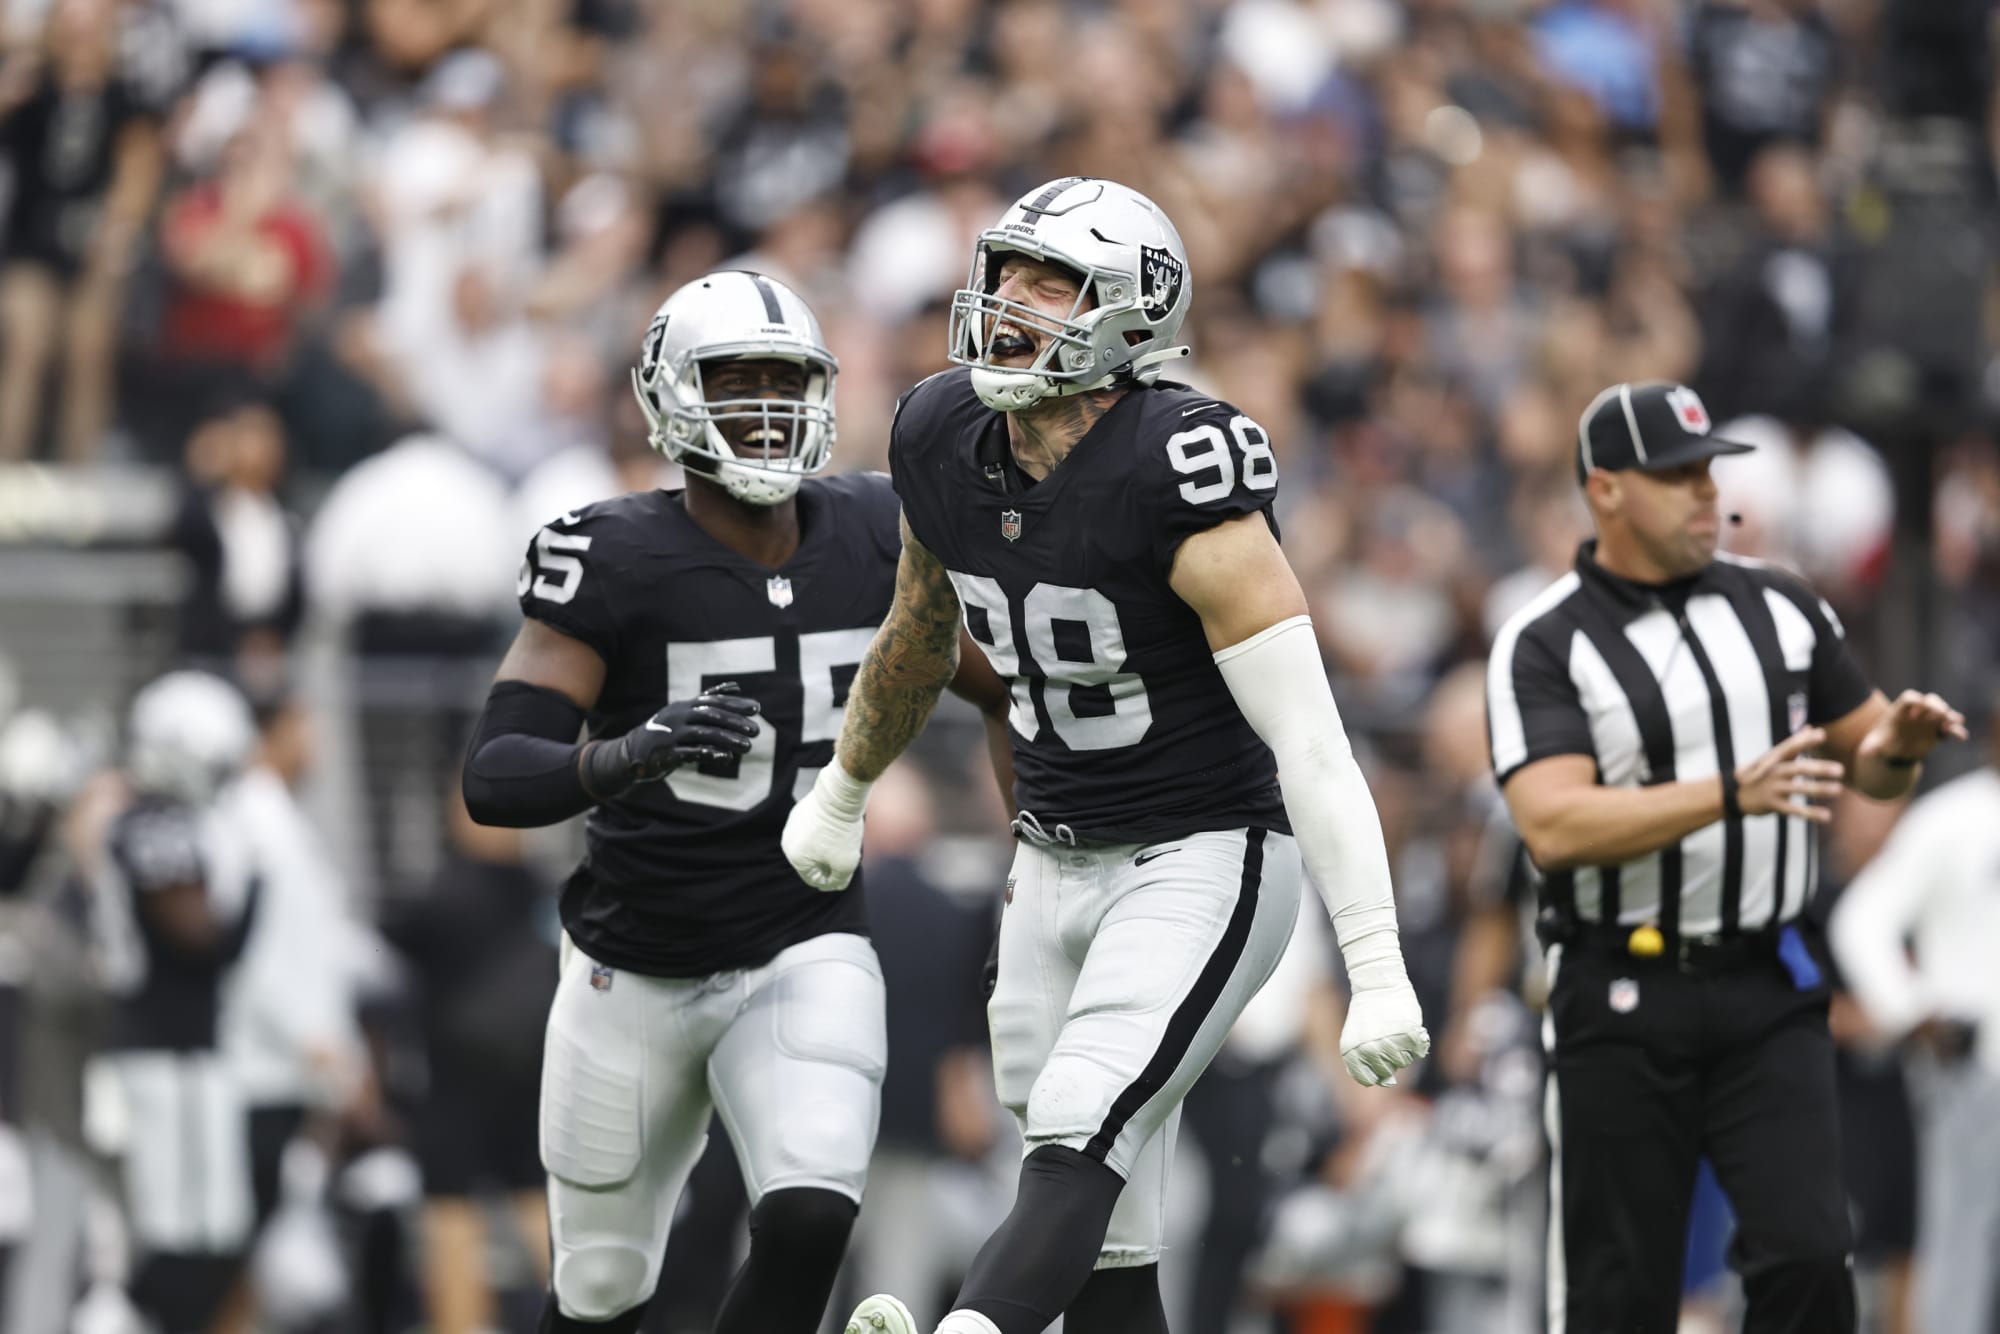 Raiders at Titans 2022 Week 3: Game preview and prediction